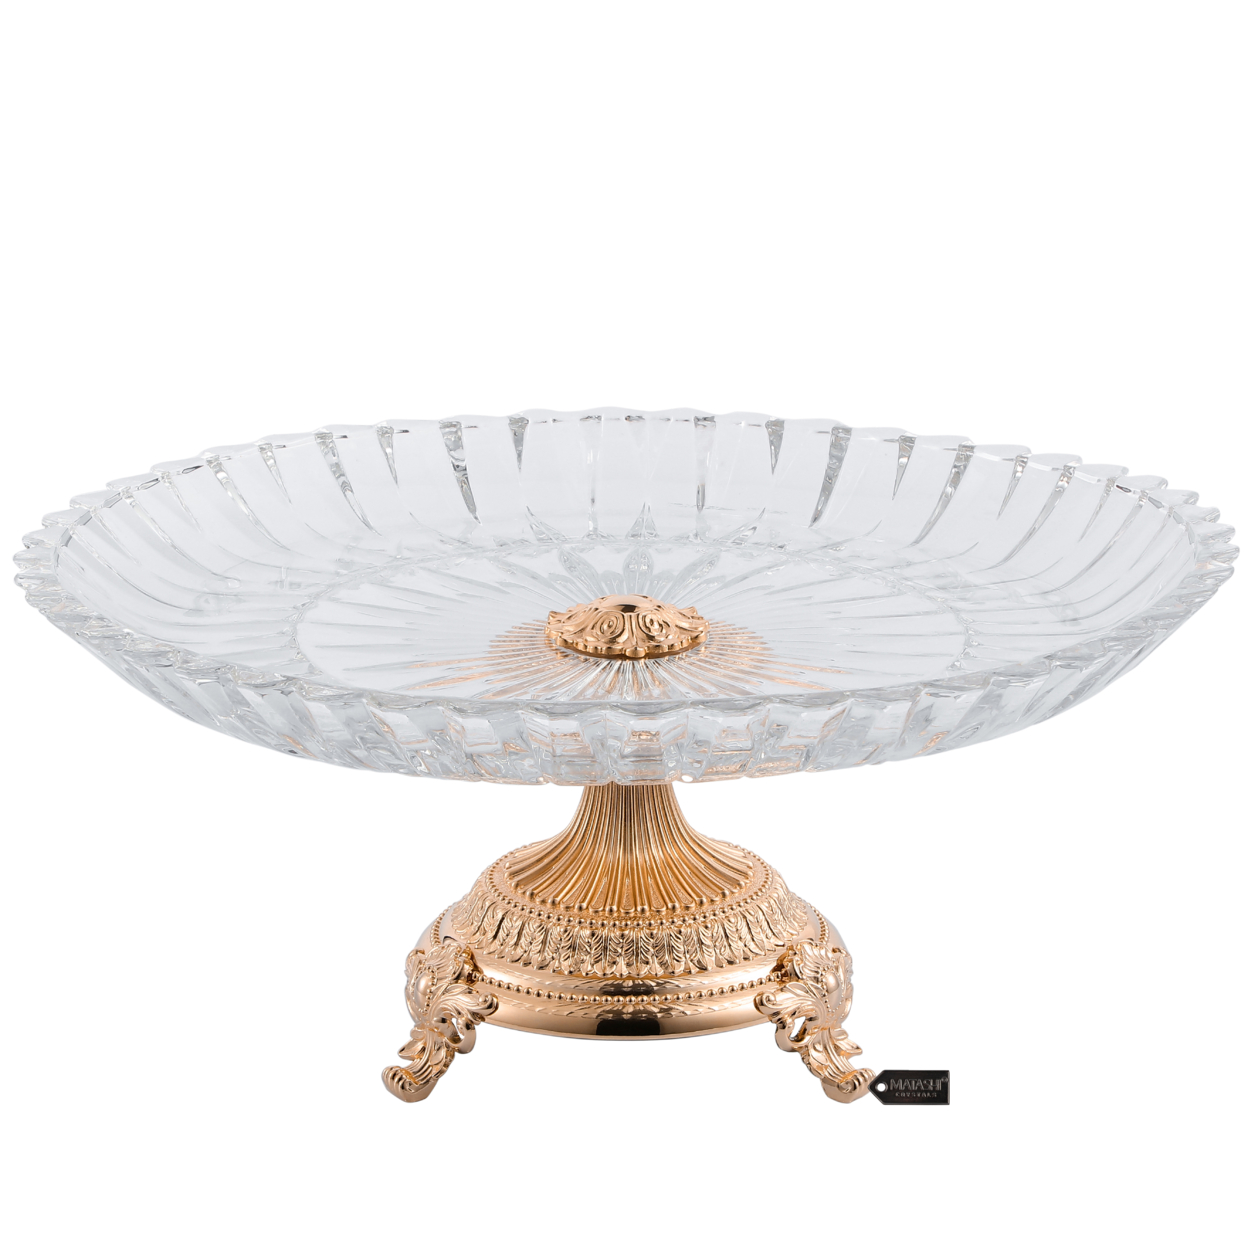 Matashi Cake Plate Centerpiece Decorative Dish, Round Serving Platter W/ Rose Gold Plated Pedestal Base For Weddings Parties